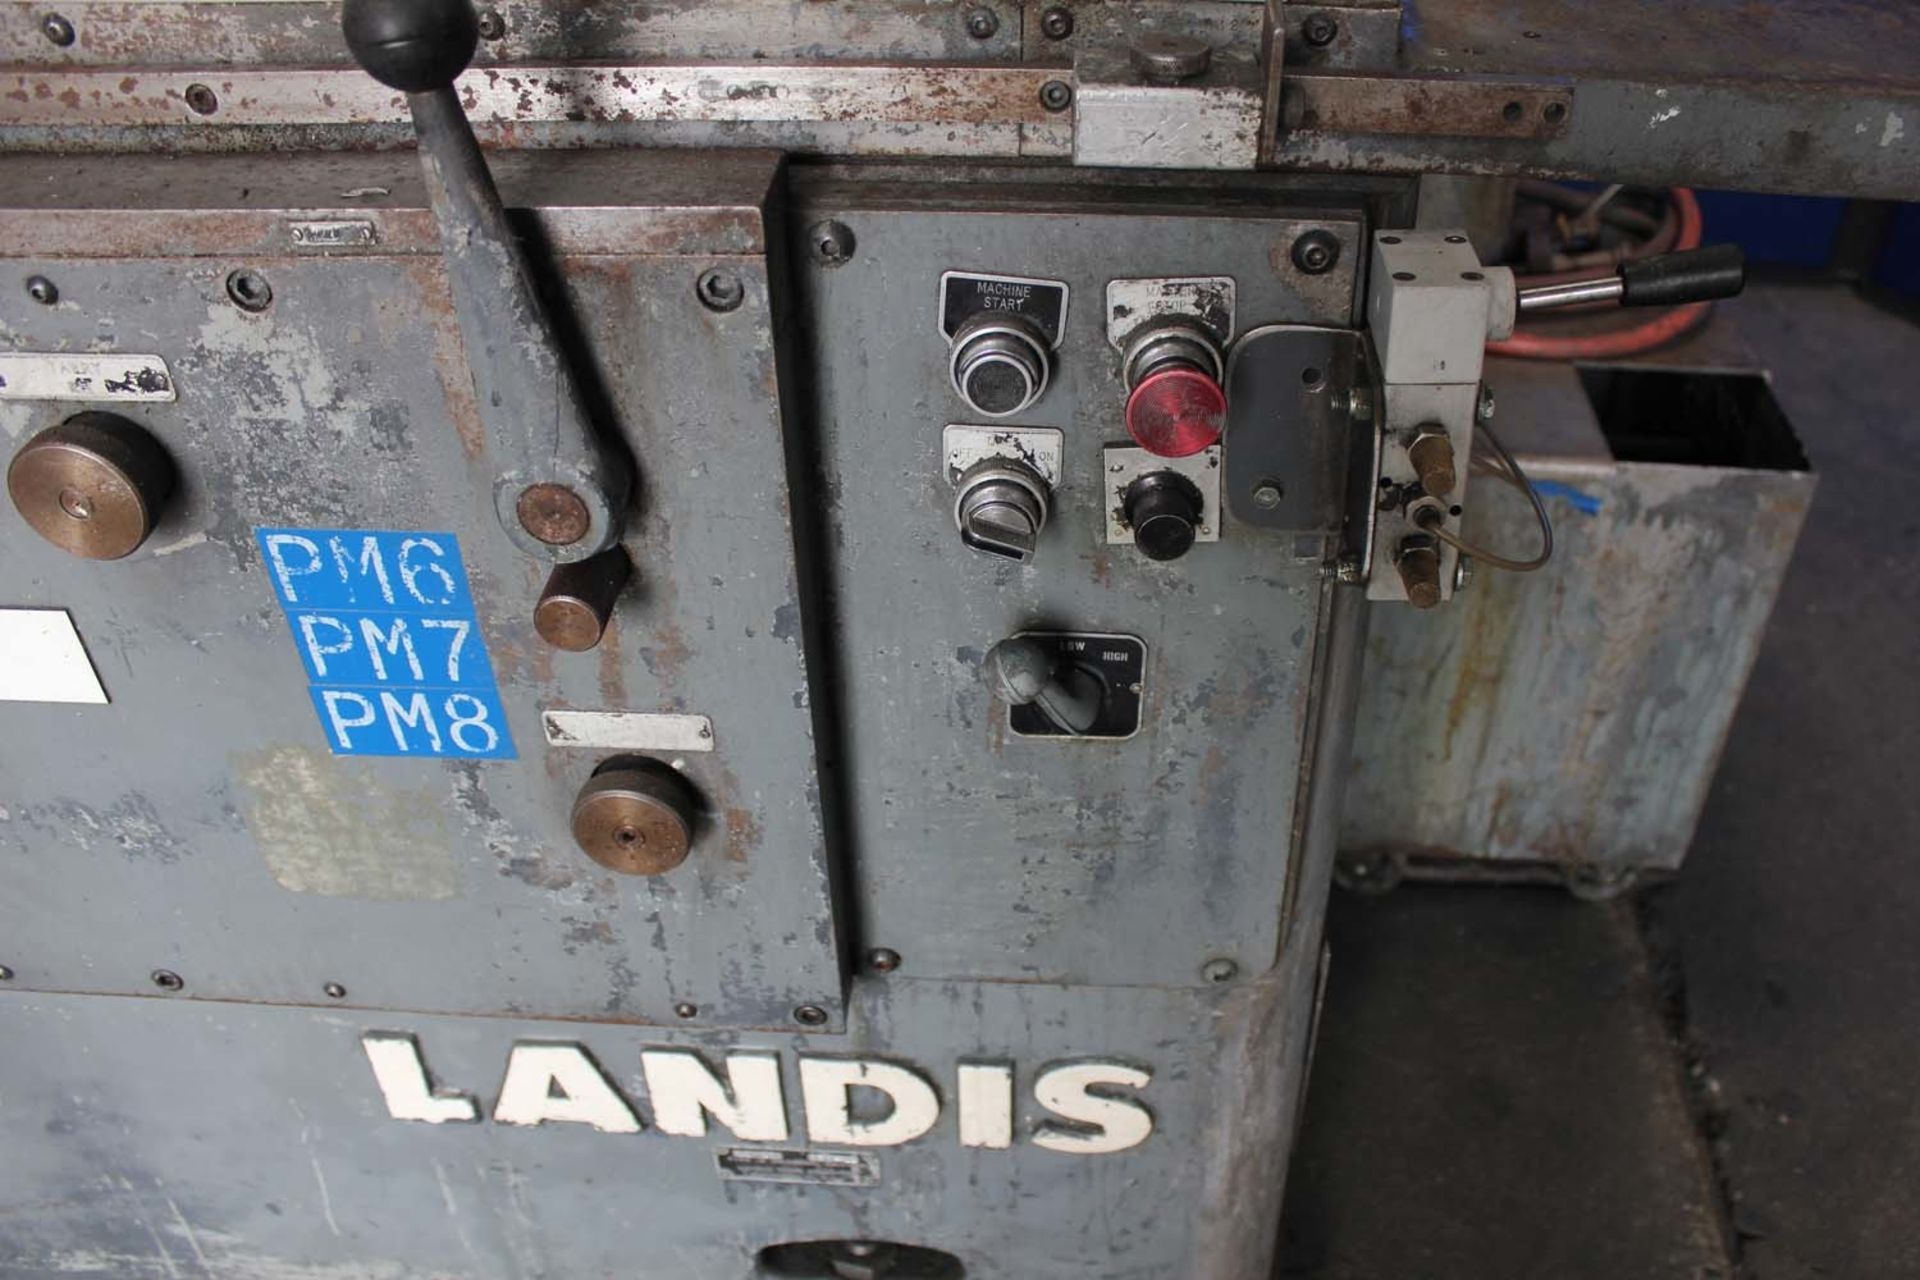 10" Swing x 20" Center Landis 1R Universal Cylindrical OD Grinder - Located In: Huntington Park, - Image 9 of 17